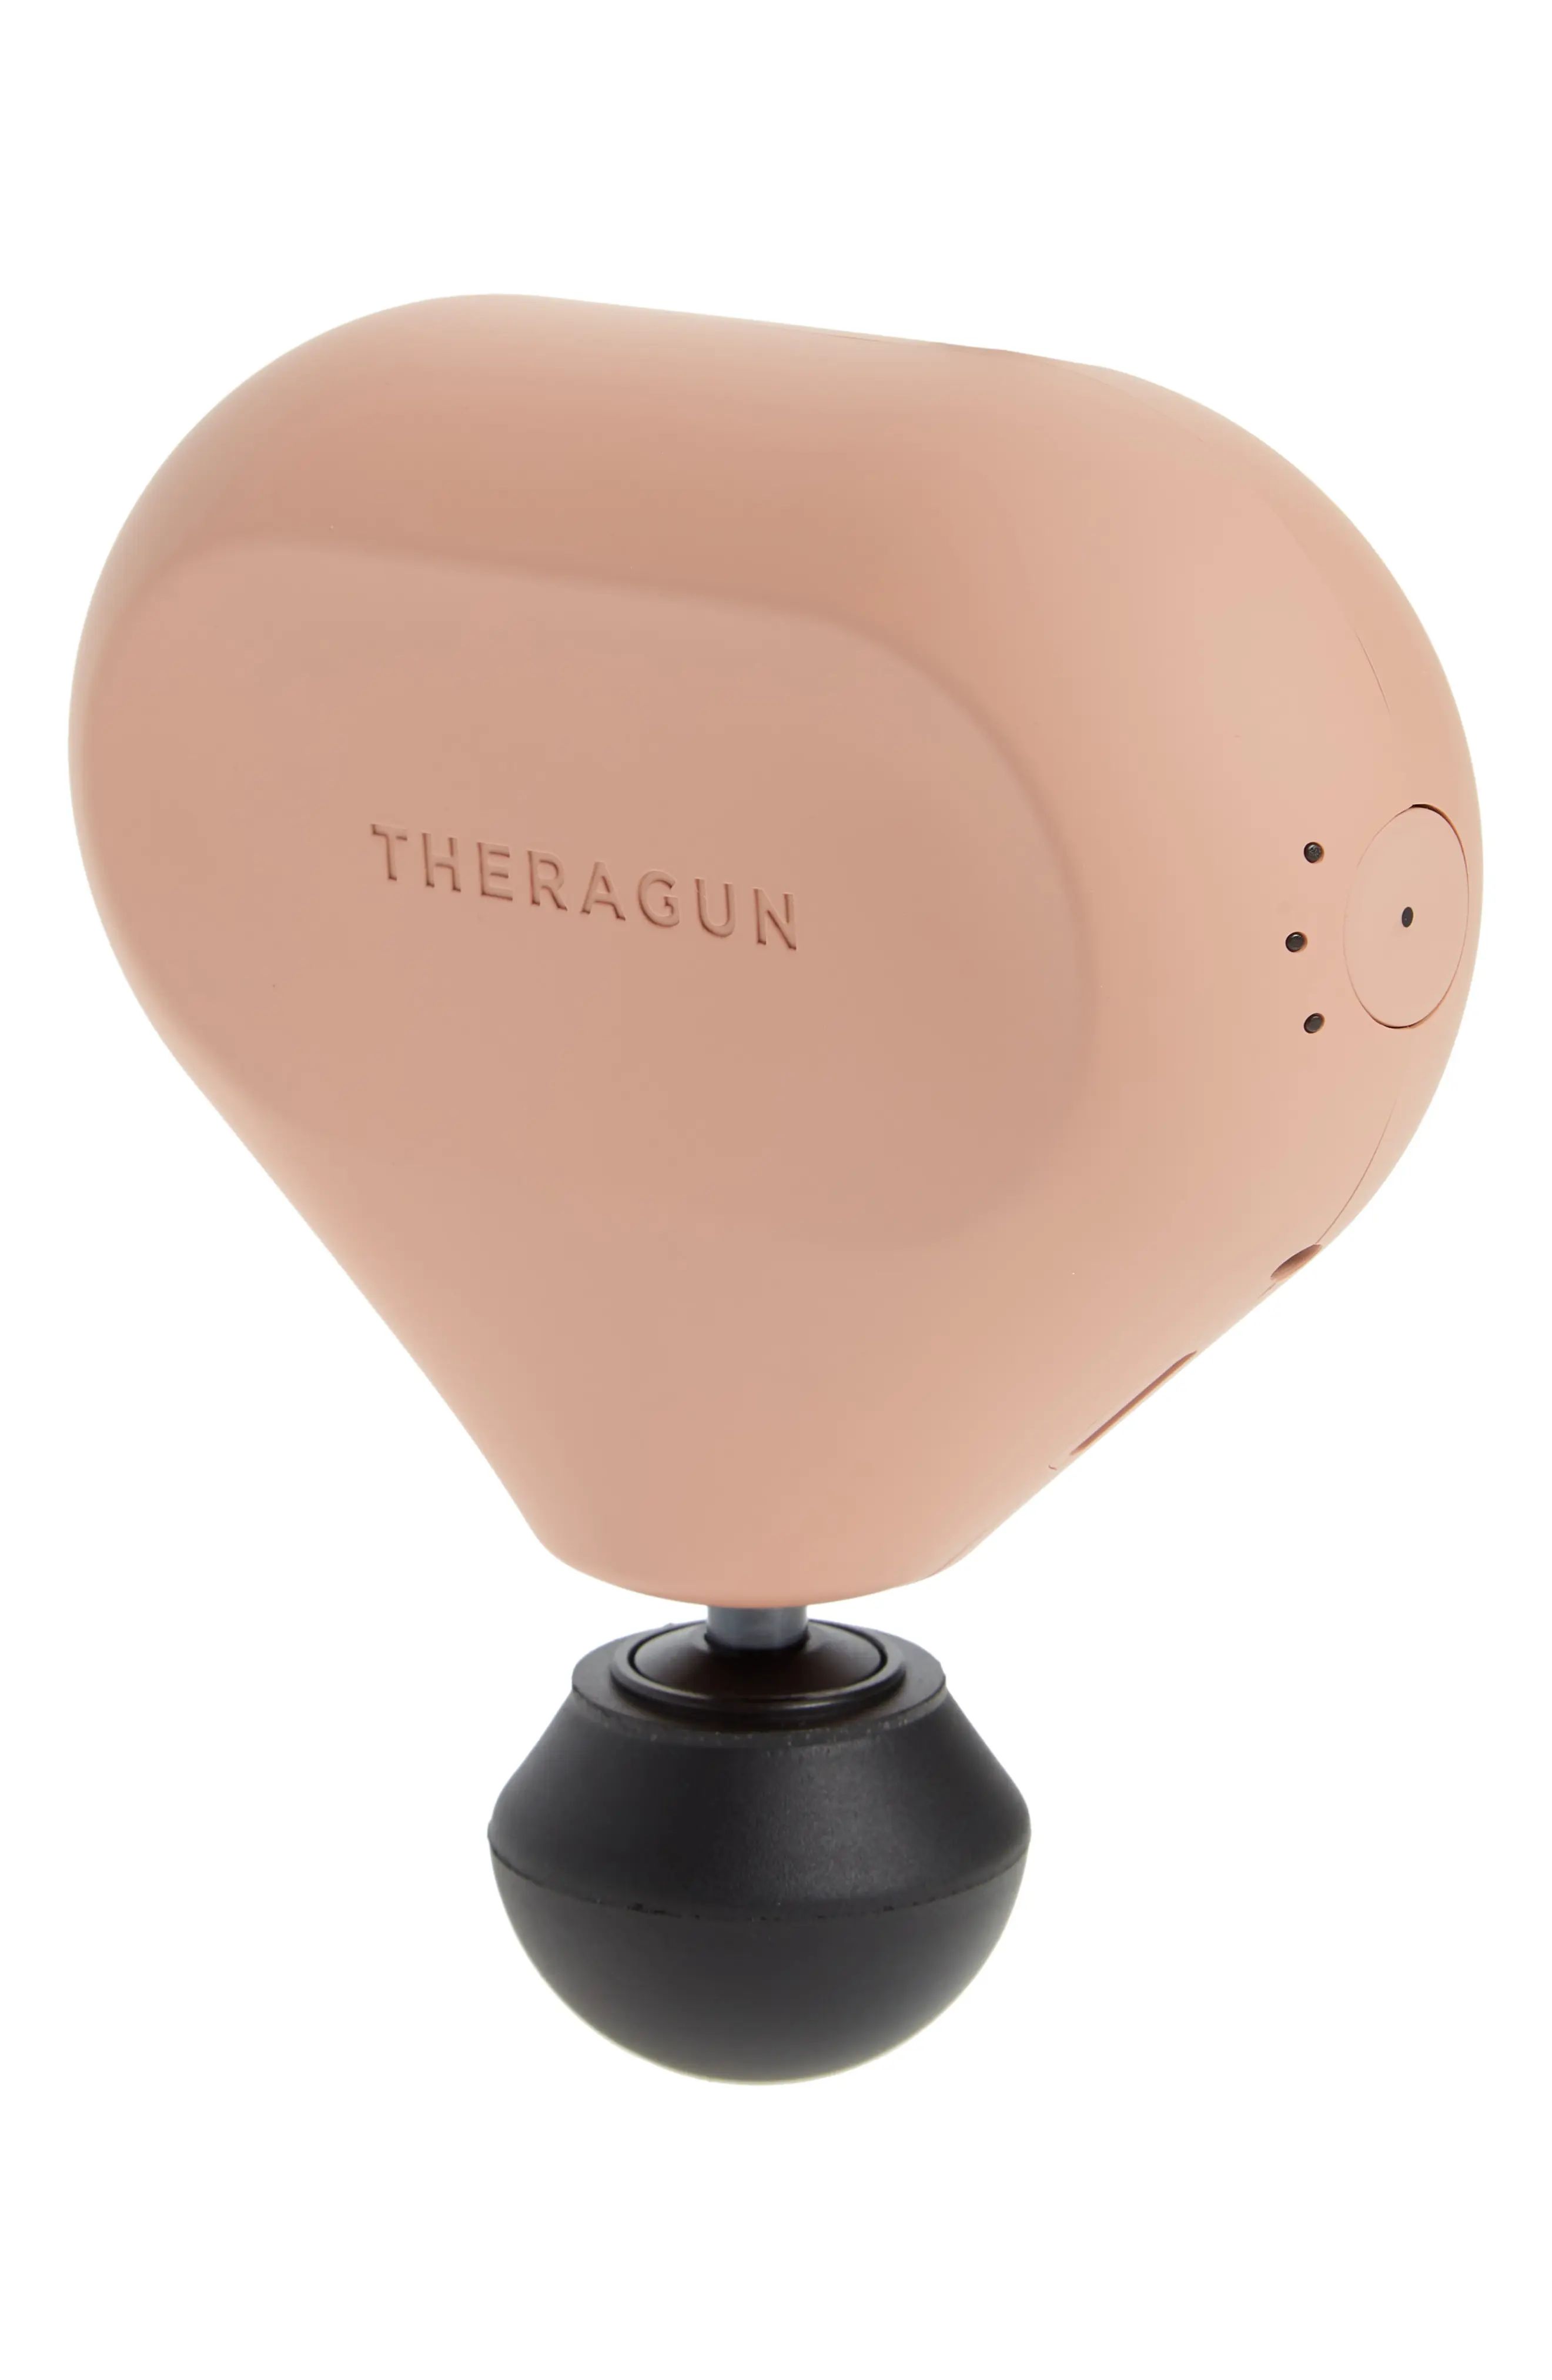 Theragun Mini Percussive Therapy Massager in Desert Rose at Nordstrom | Nordstrom